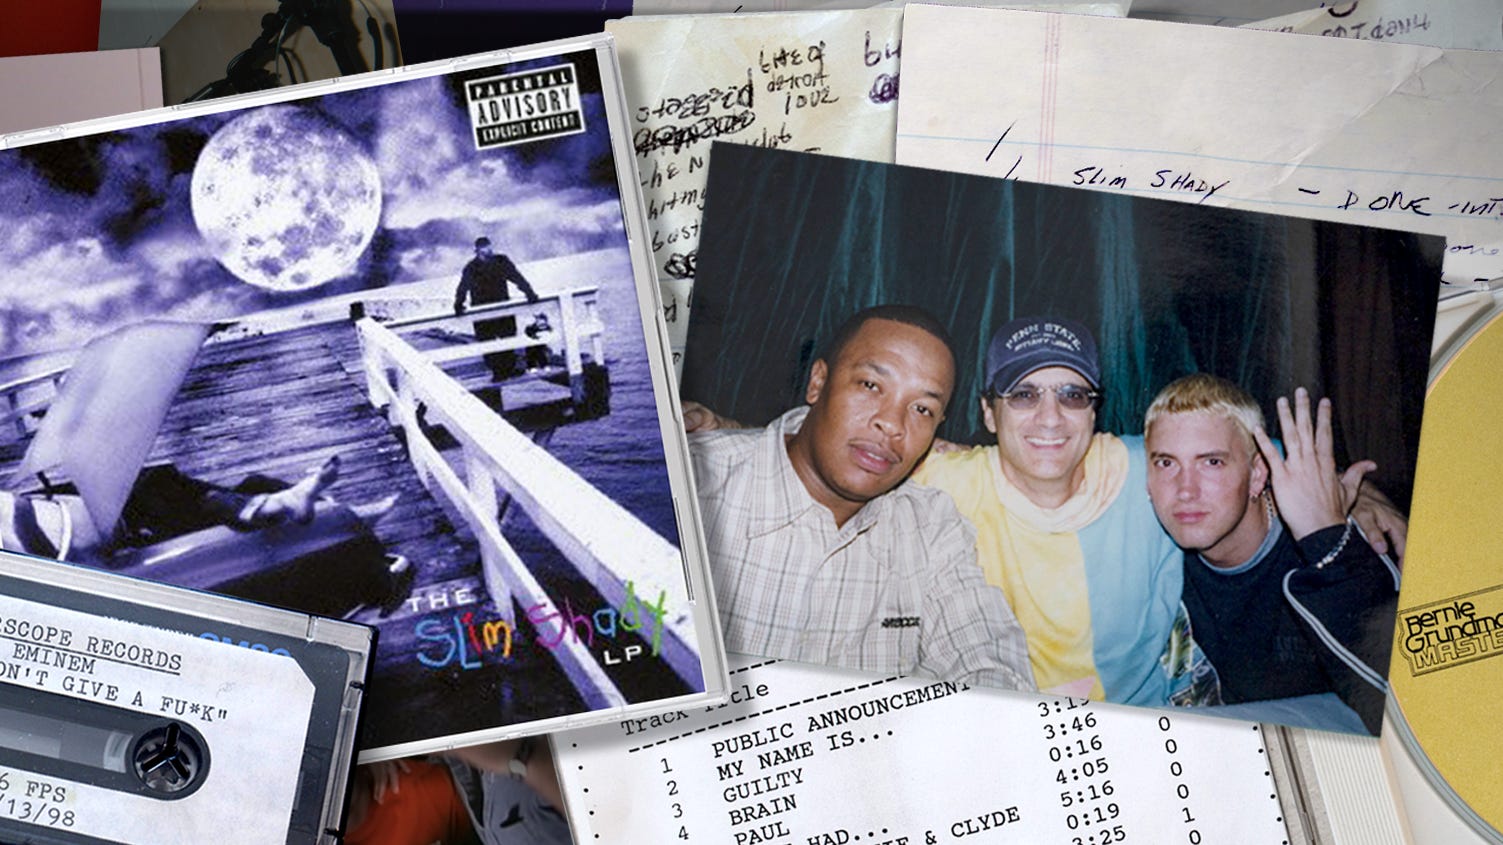 7 reasons Eminem's 'The Slim Shady LP' is a classic